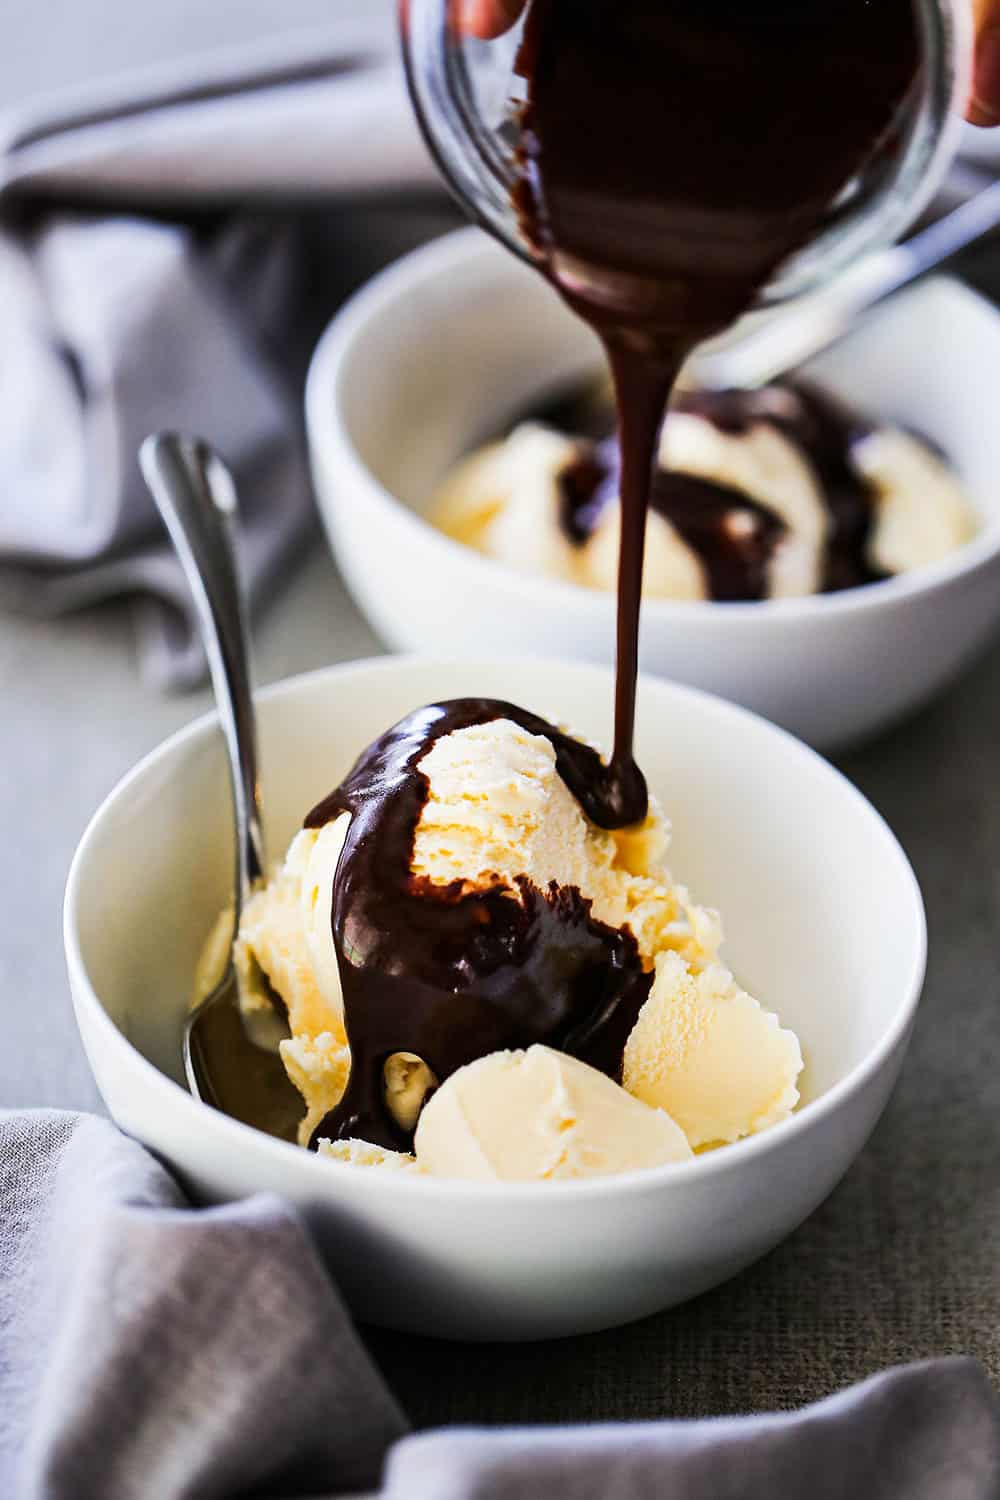 A small jar of homemade chocolate sauce being poured over a bowl filled with several scoops of vanilla ice cream.